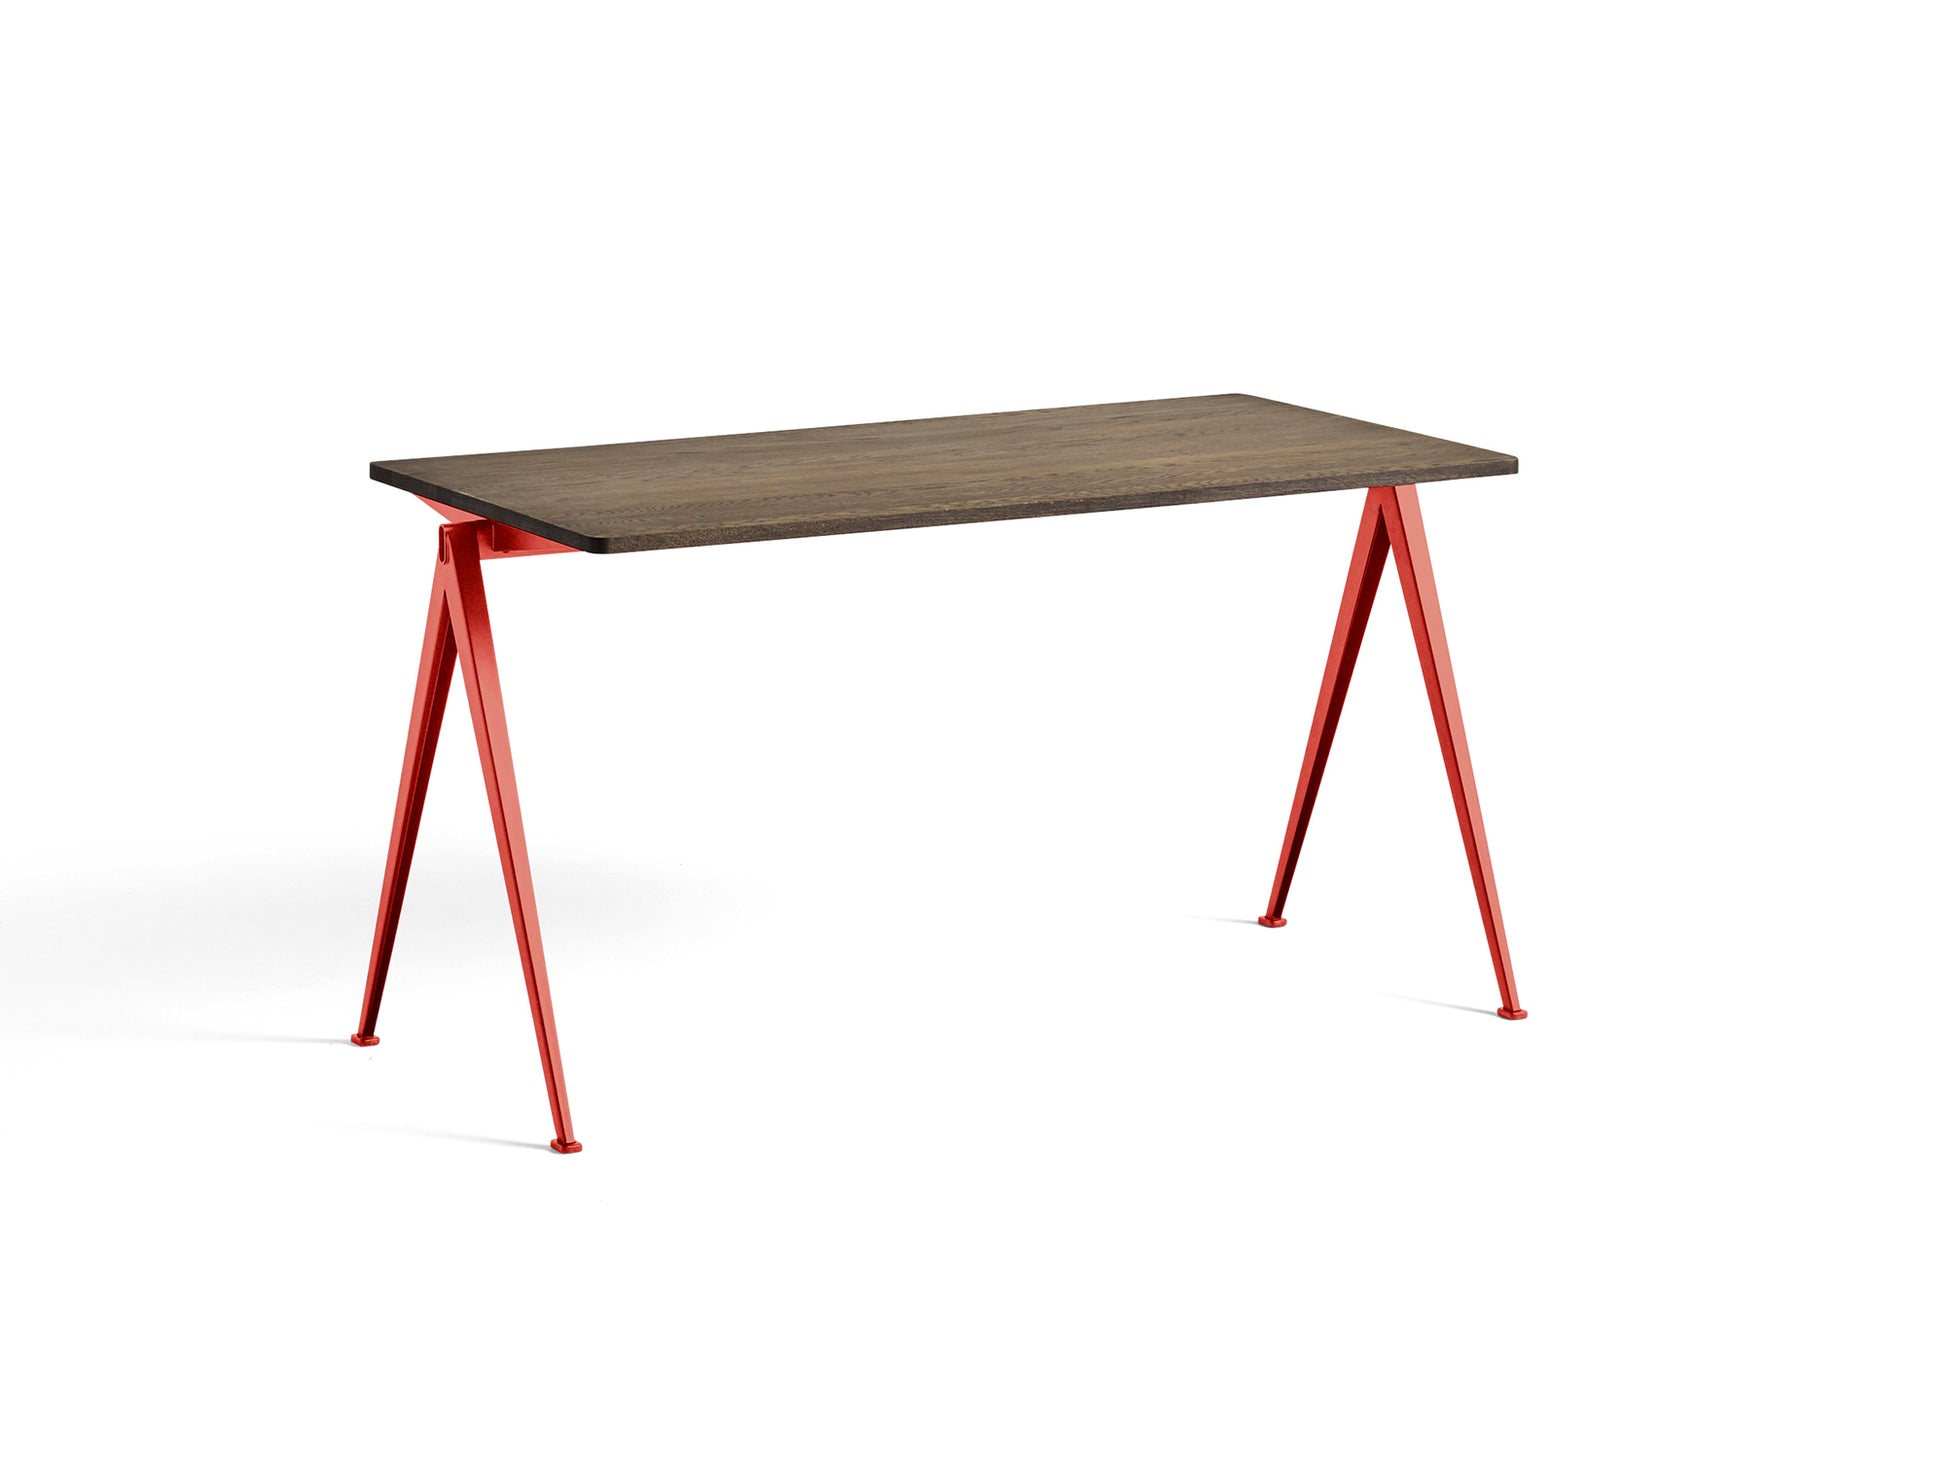 Pyramid Table 01 by HAY - Length: 140 cm / Width: 65 cm / Smoked Solid Oak / Tomato Red Frame